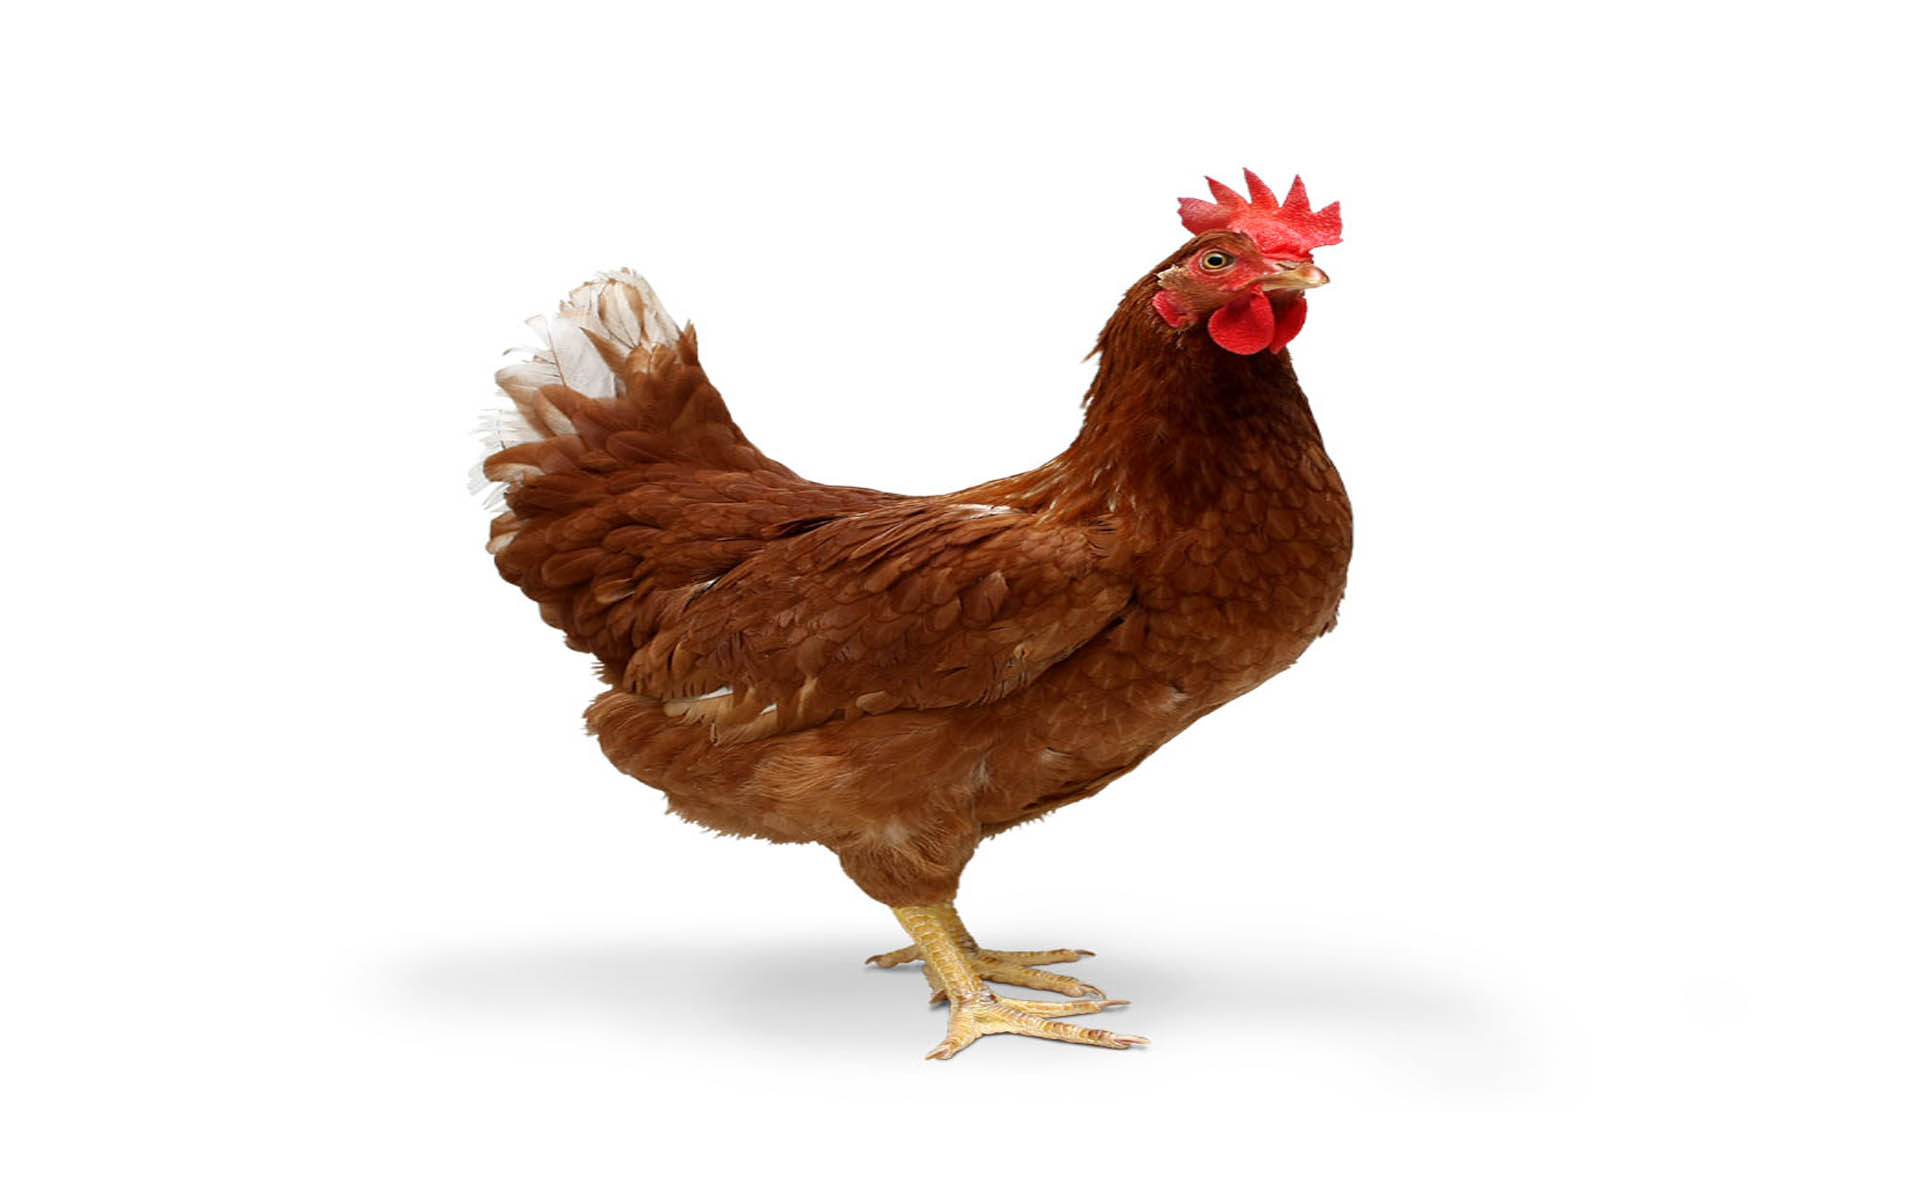 Wallpaper.wiki Chicken Backgrounds Pic Wpc001390 - Chicken, Transparent background PNG HD thumbnail